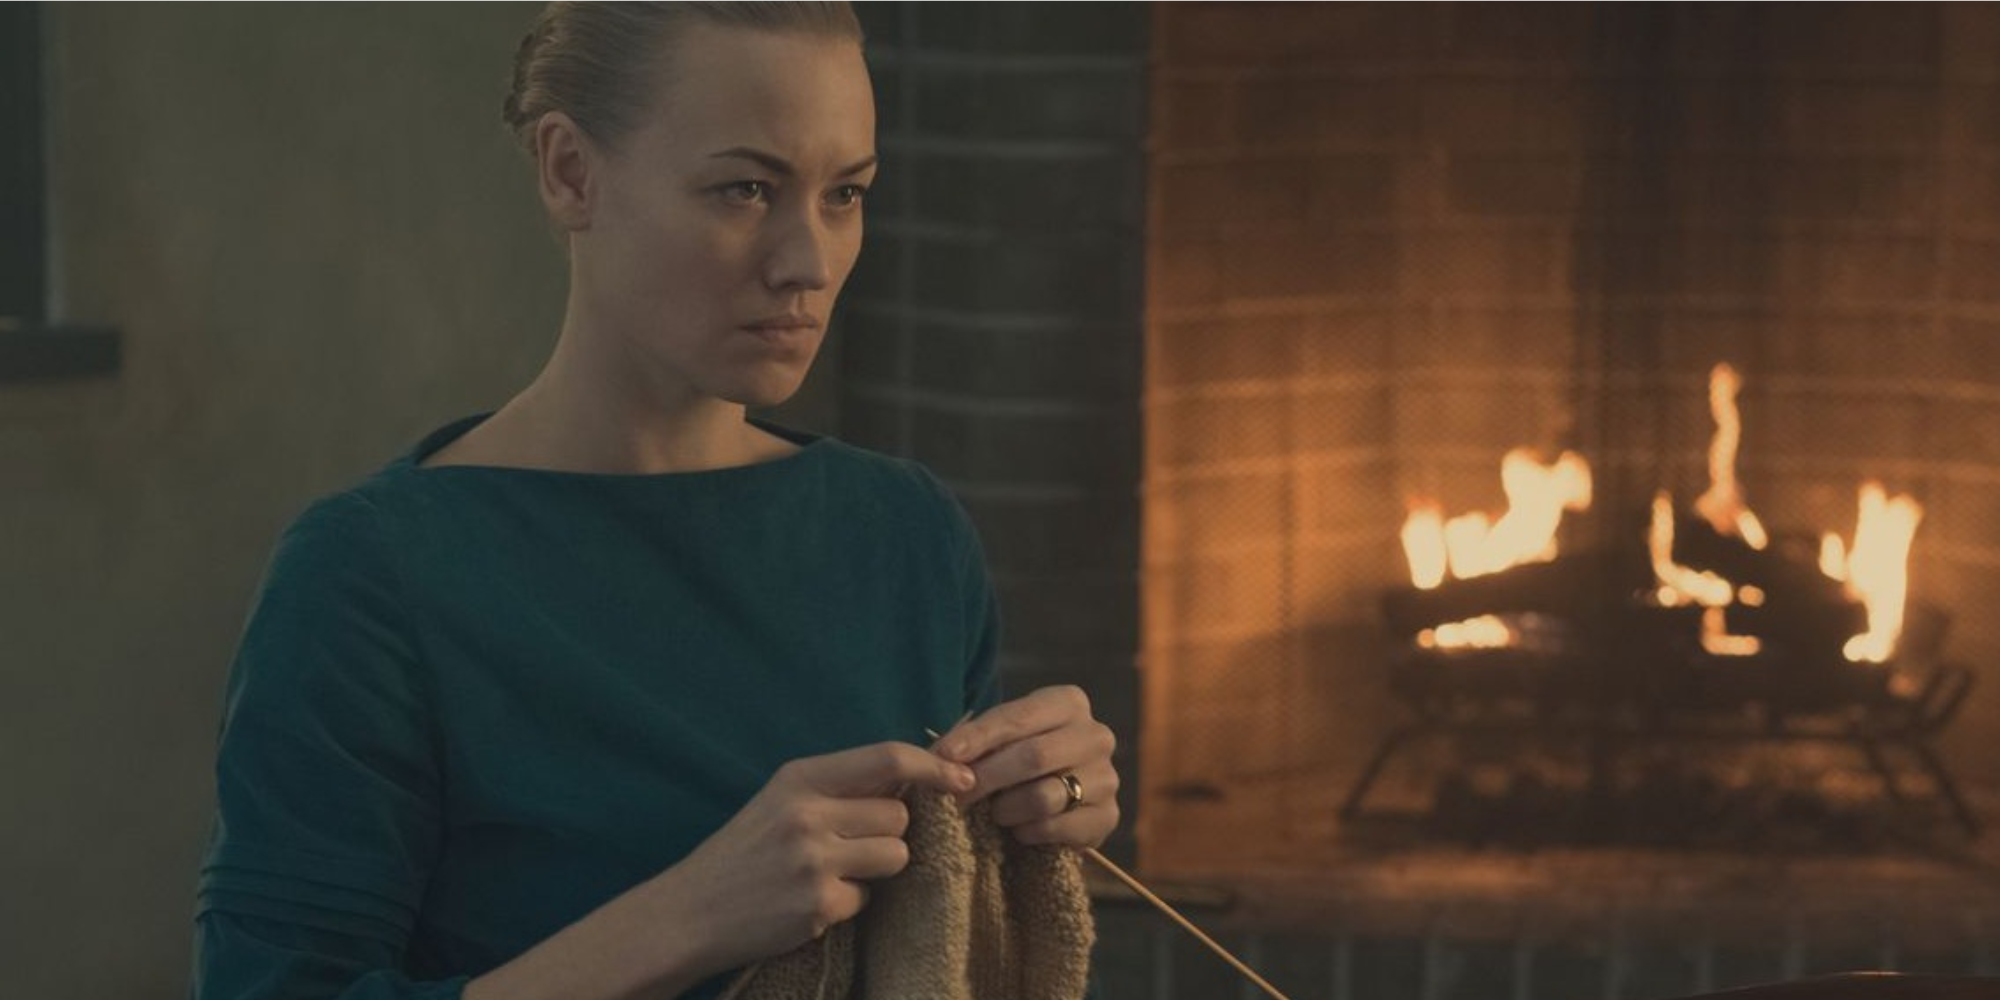 Serena Joy knitting by the fire